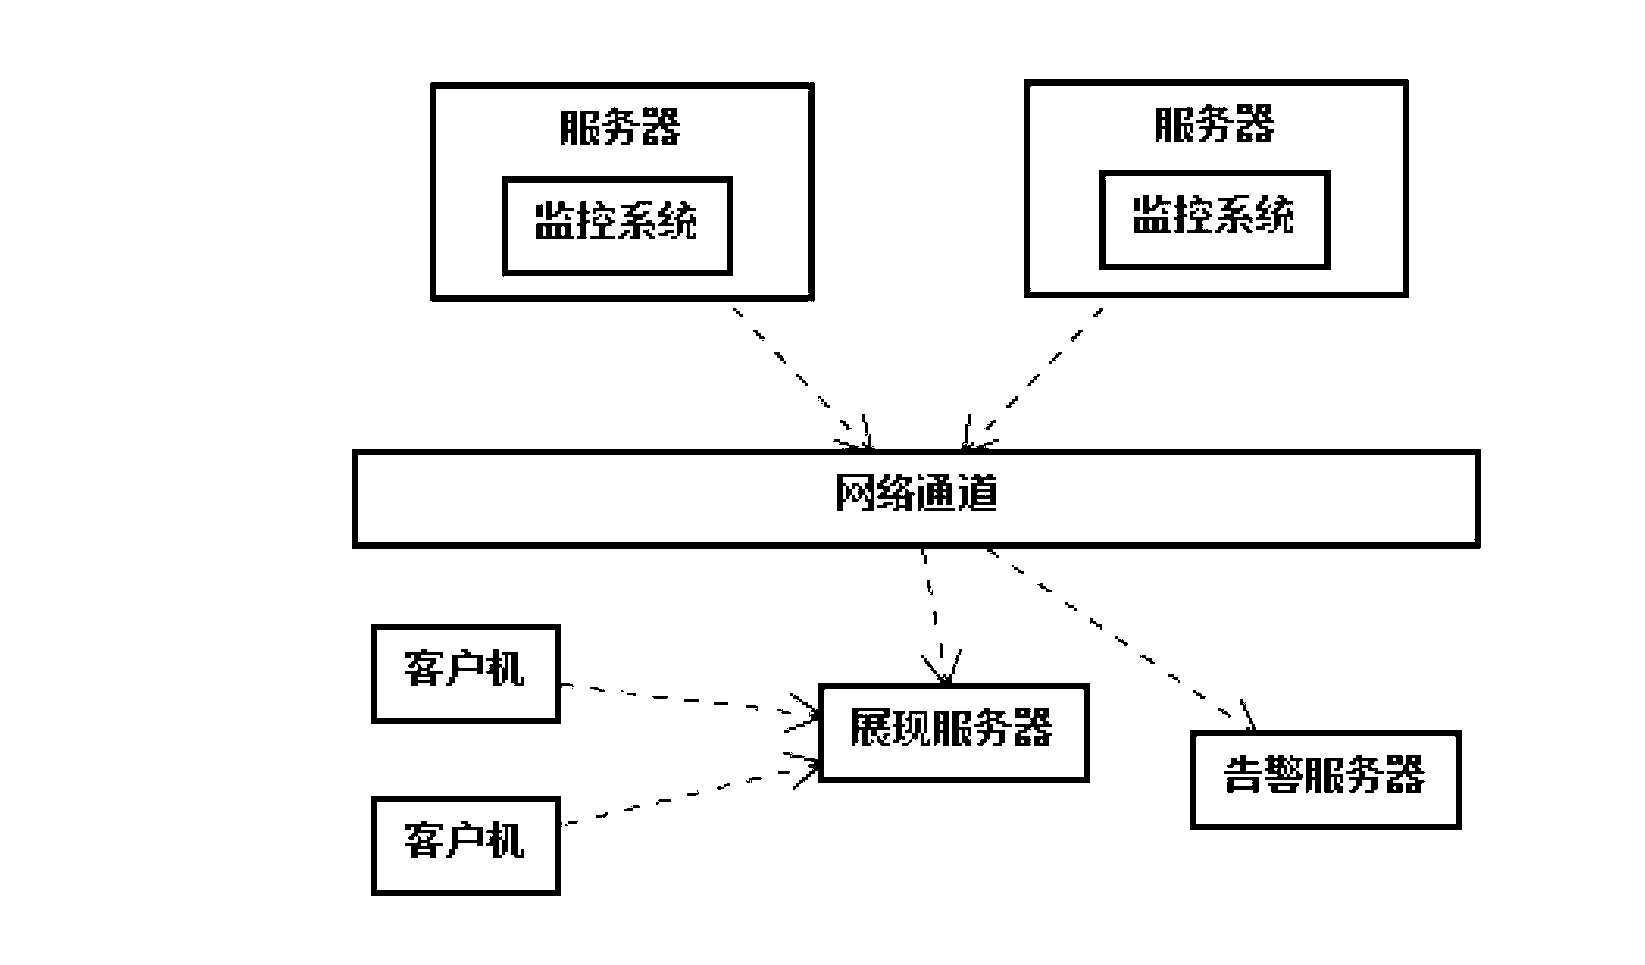 Method for achieving hyper text transport protocol (http) service monitoring through embedding monitoring code